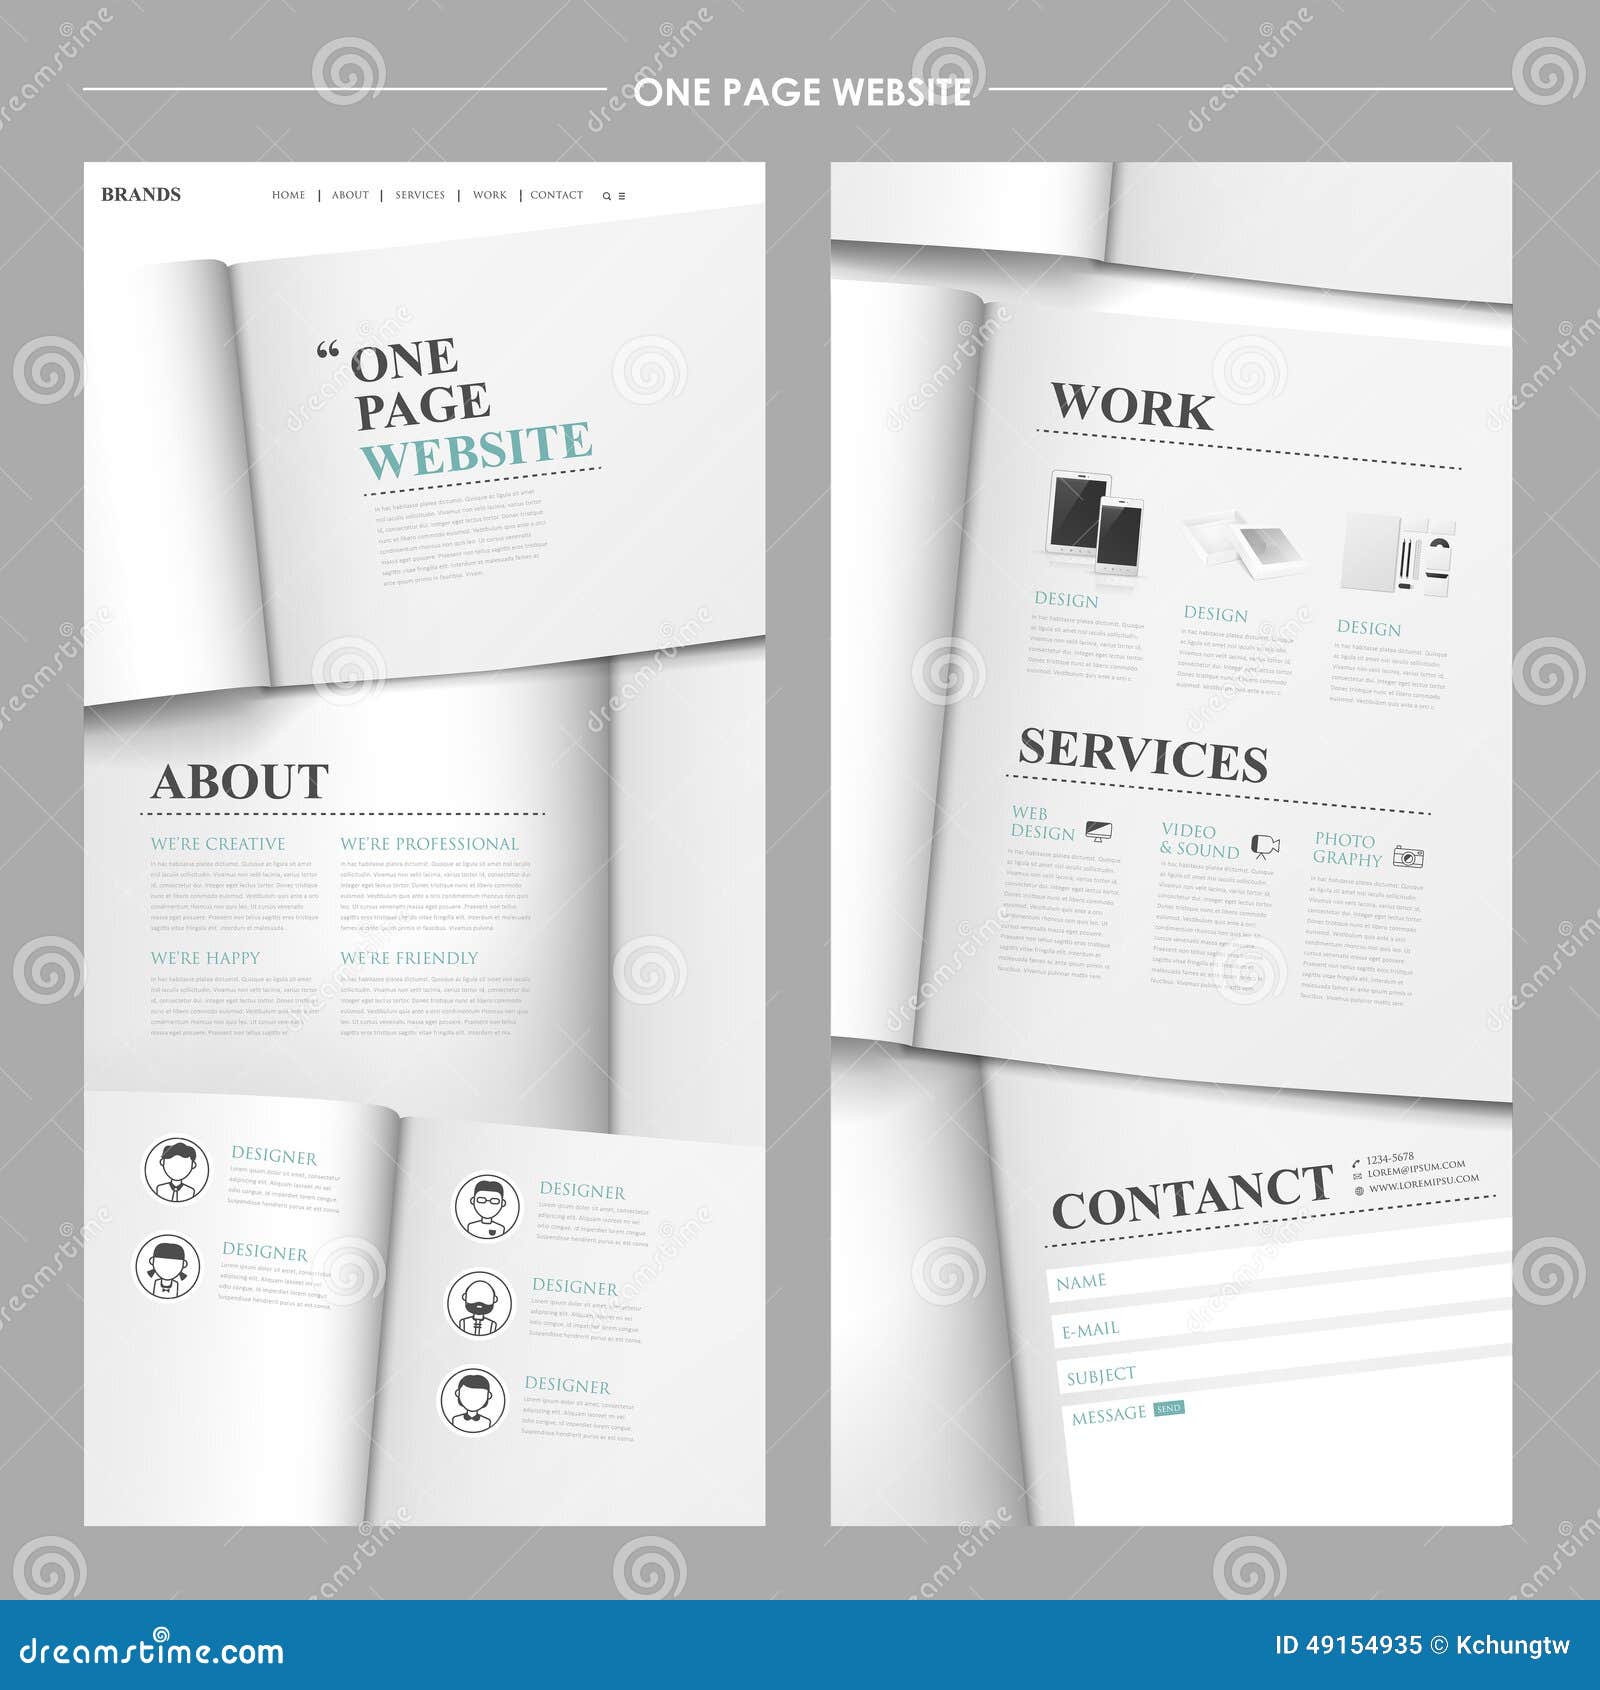 simplicity one page website 